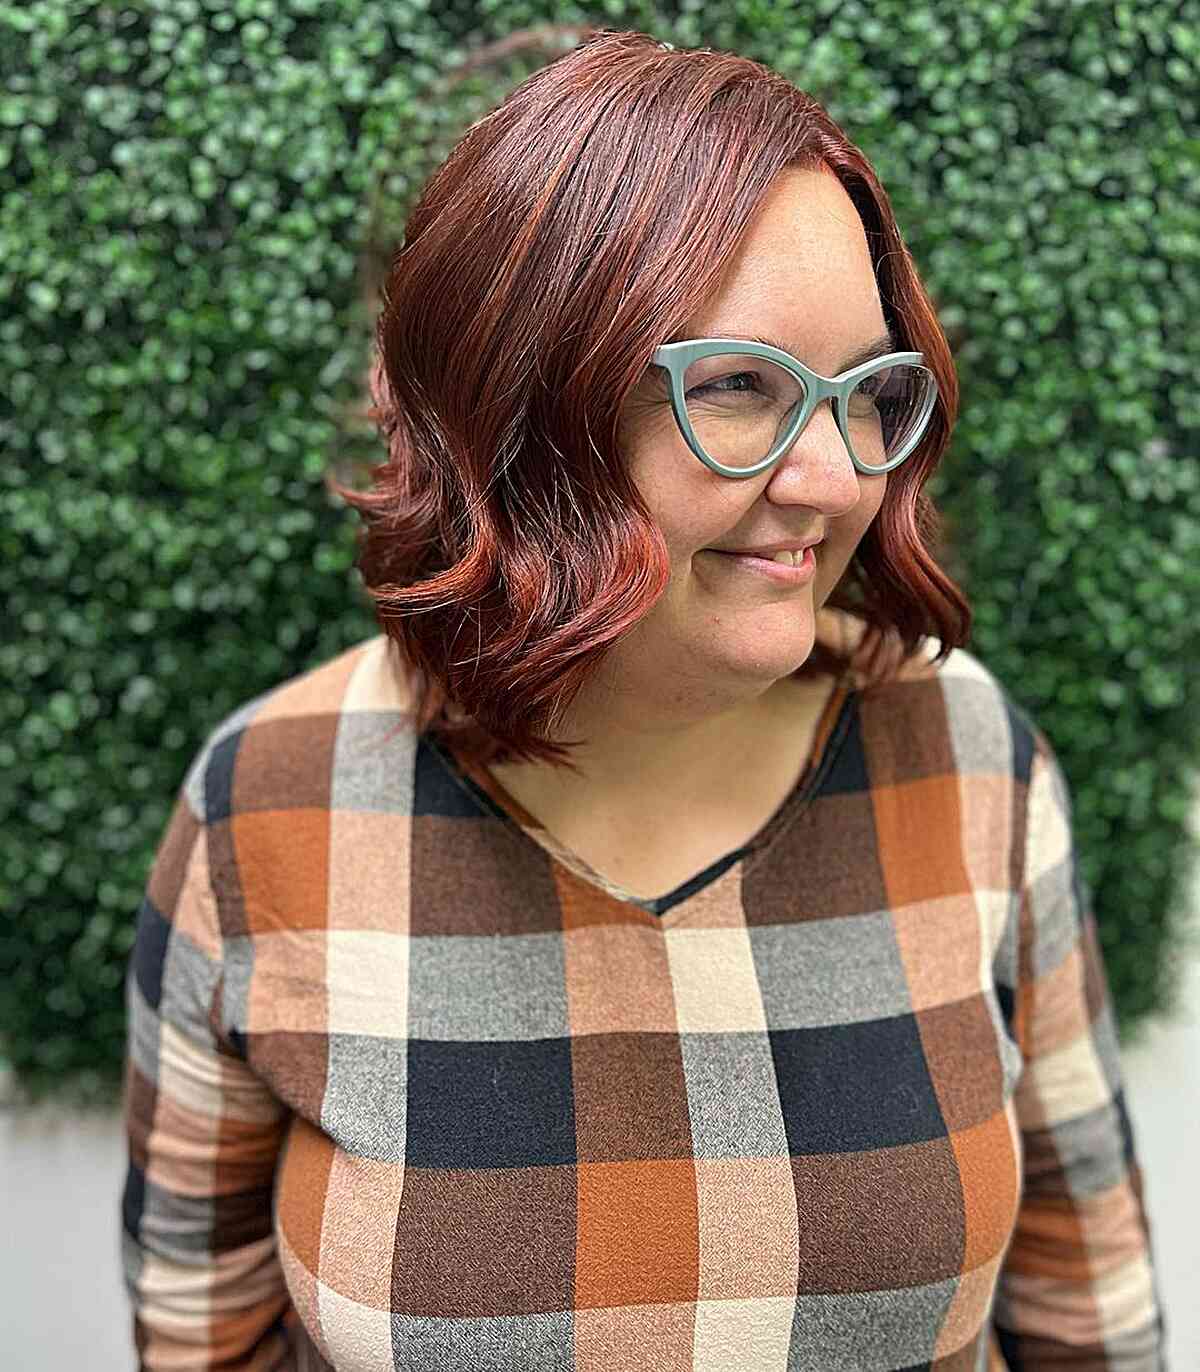 Autumn Shoulder-Length Red Brown Layered Hair on Older Women Aged 40